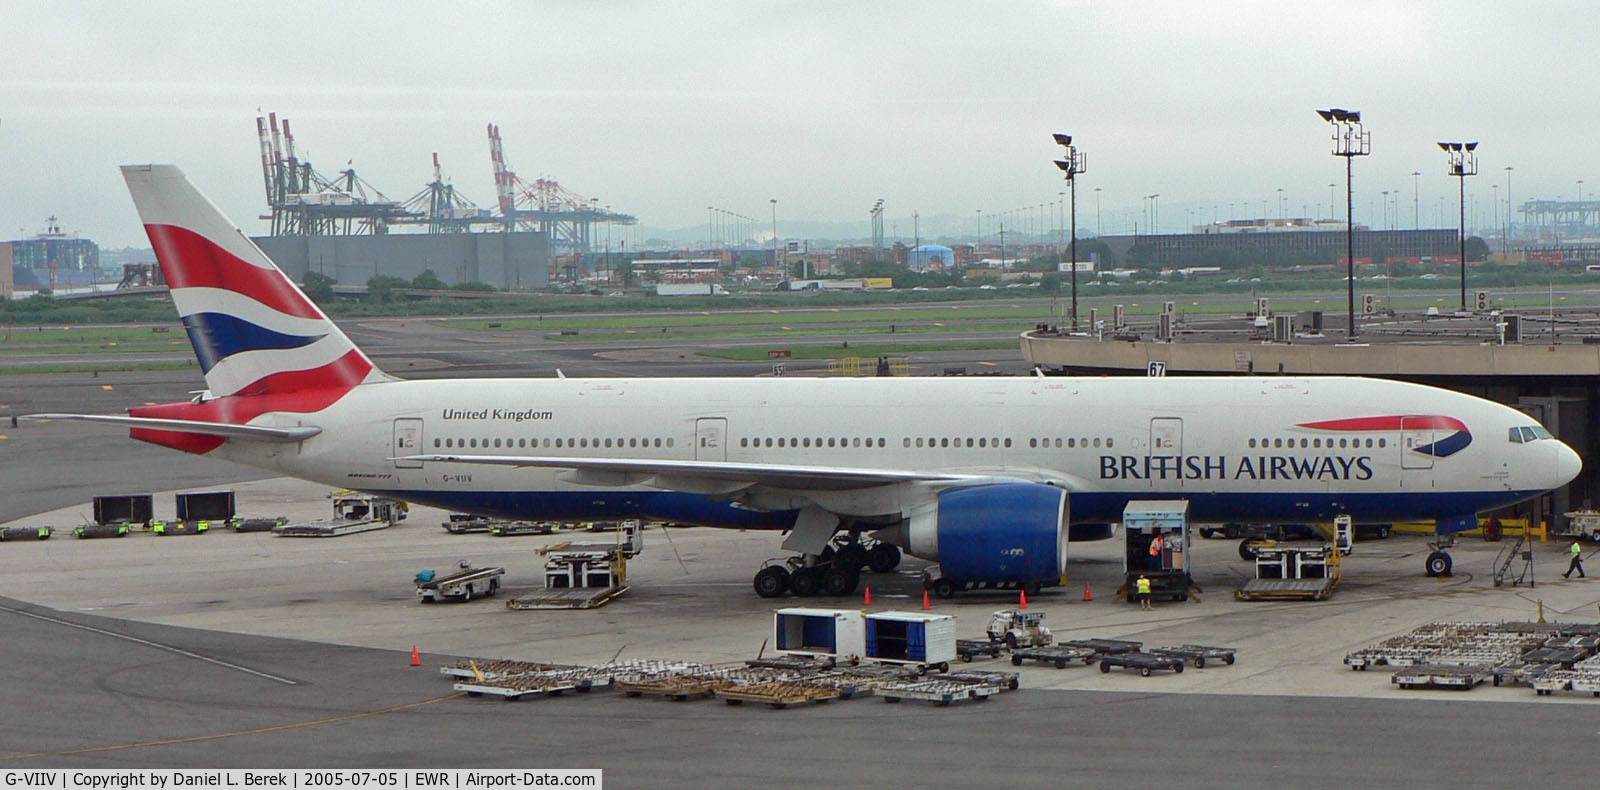 G-VIIV, 1999 Boeing 777-236 C/N 29964, One of BA's many Triple-7s prepares for a trans-Atlantic voyage after visiting Newark.